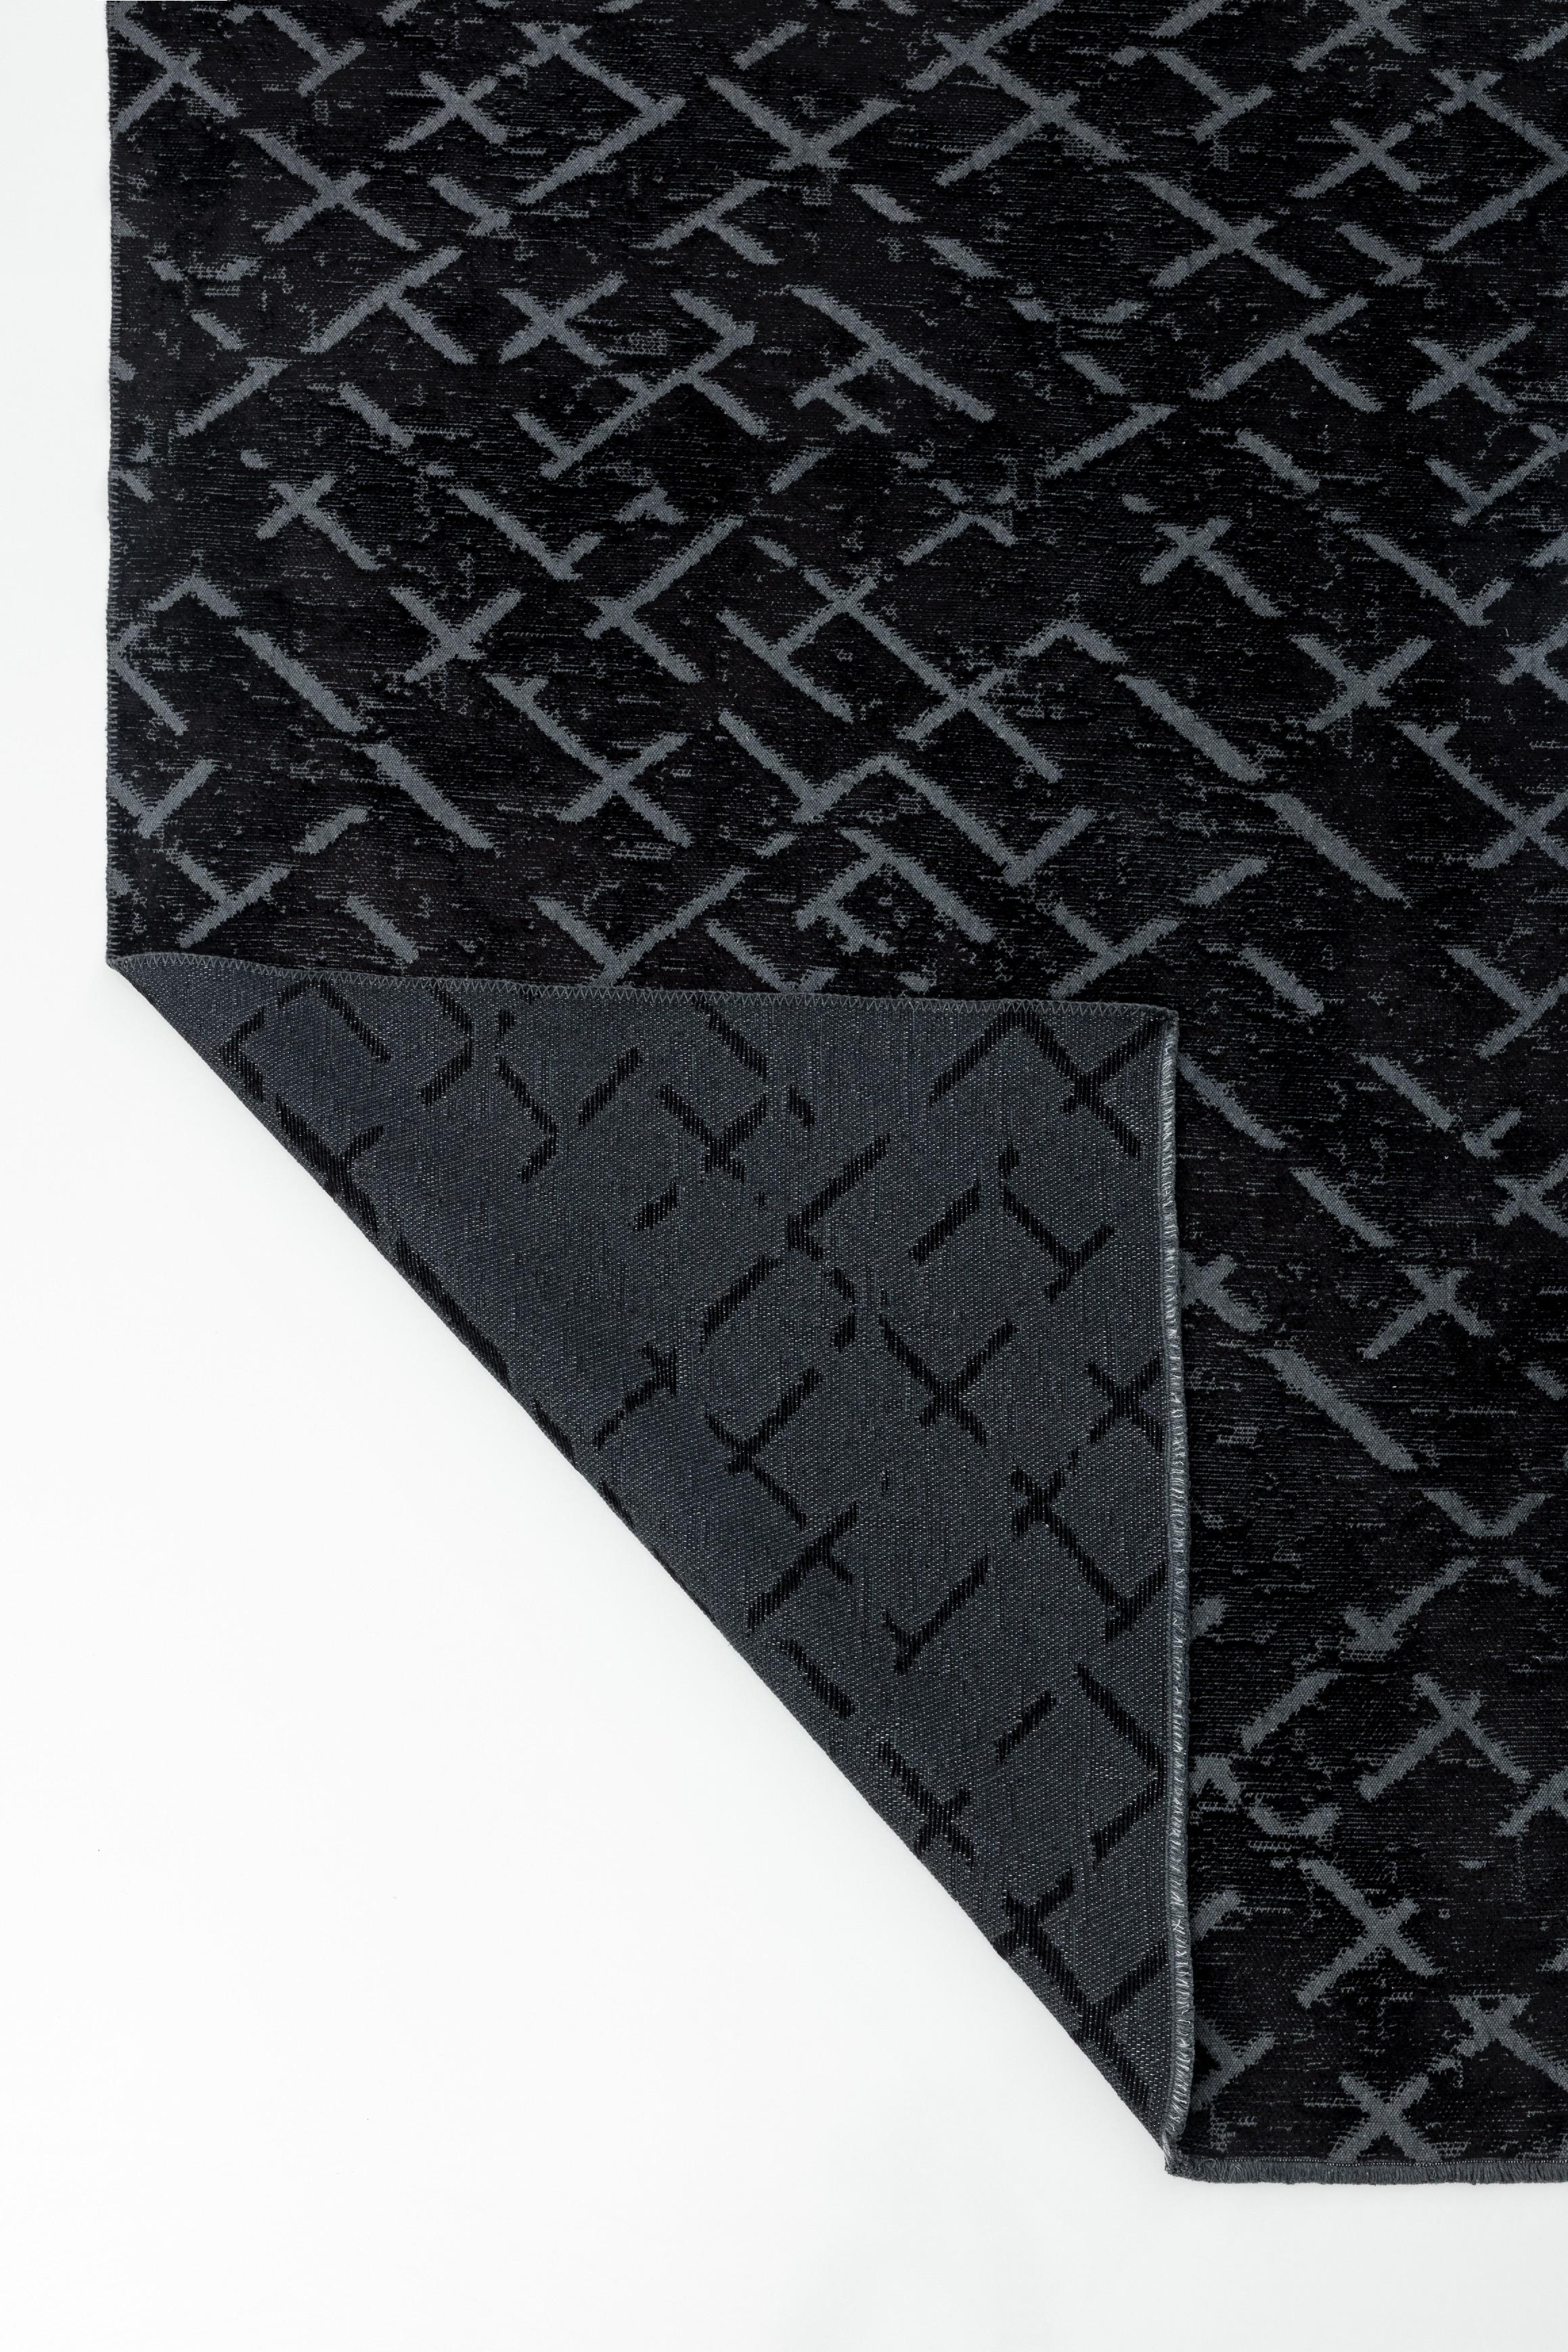 For Sale:  (Black) Modern Abstract Luxury Hand-Finished Area Rug 4